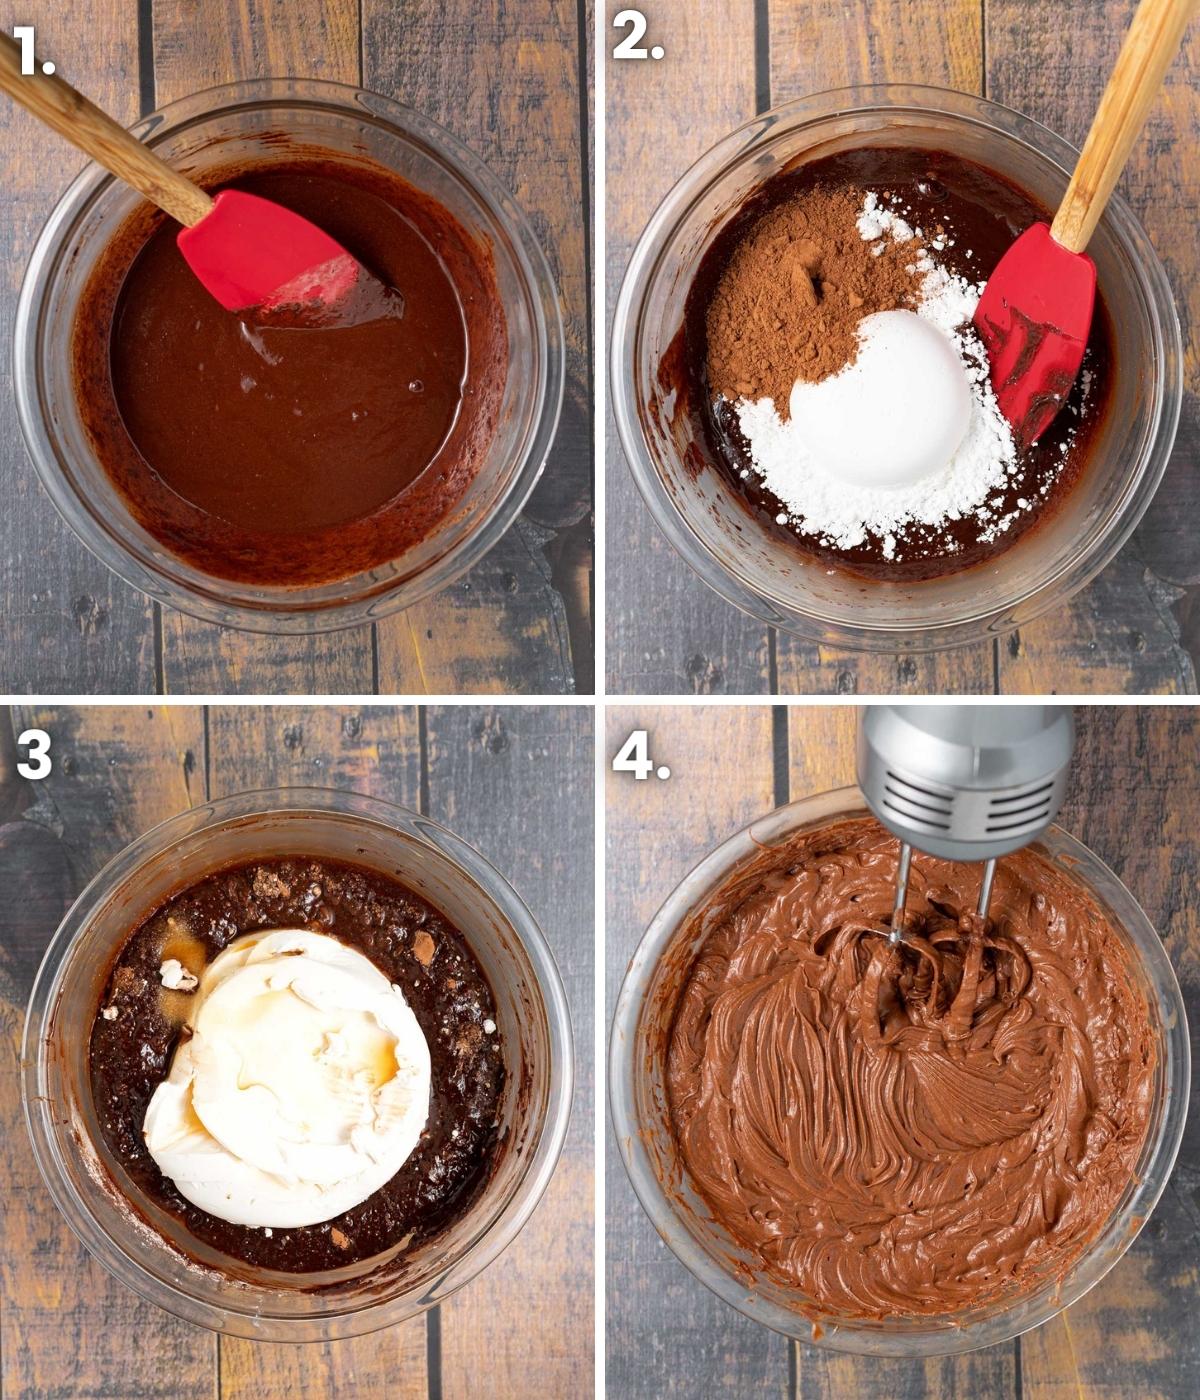 how to make the chocolate cheesecake filling as per the written instructions